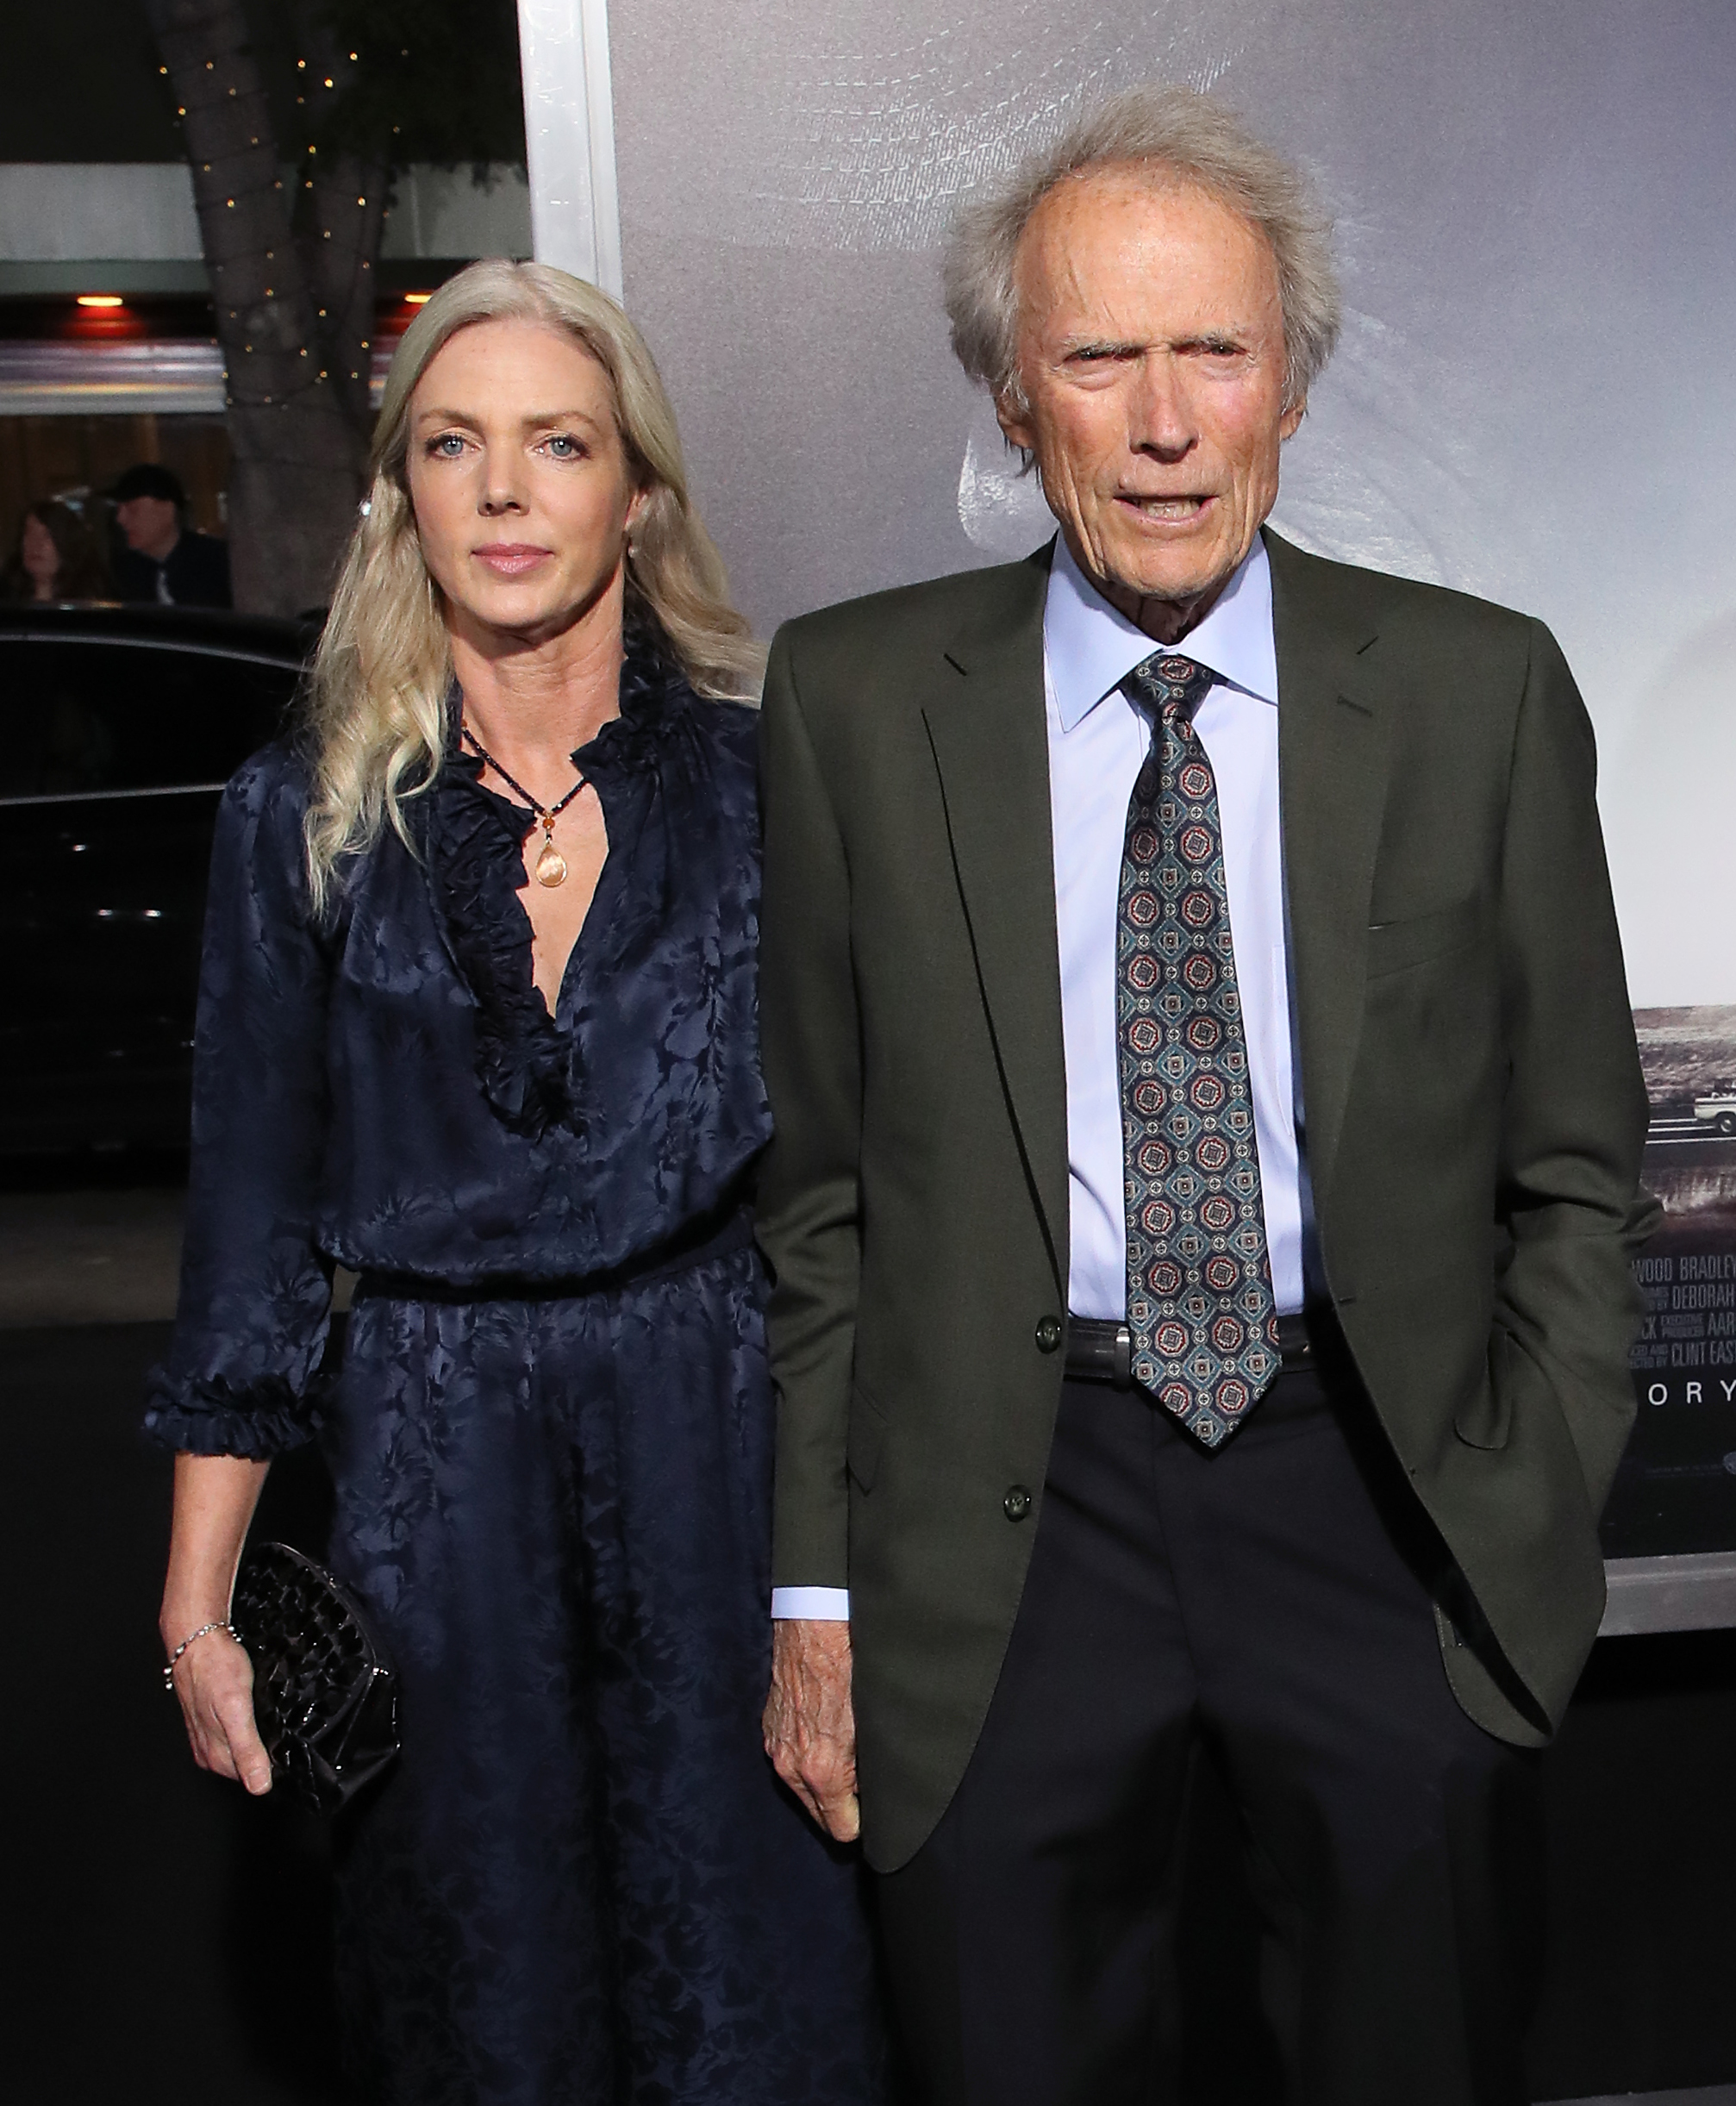 Christina Sandera and Clint Eastwood in Los Angeles, California on December 10, 2018 | Source: Getty Images